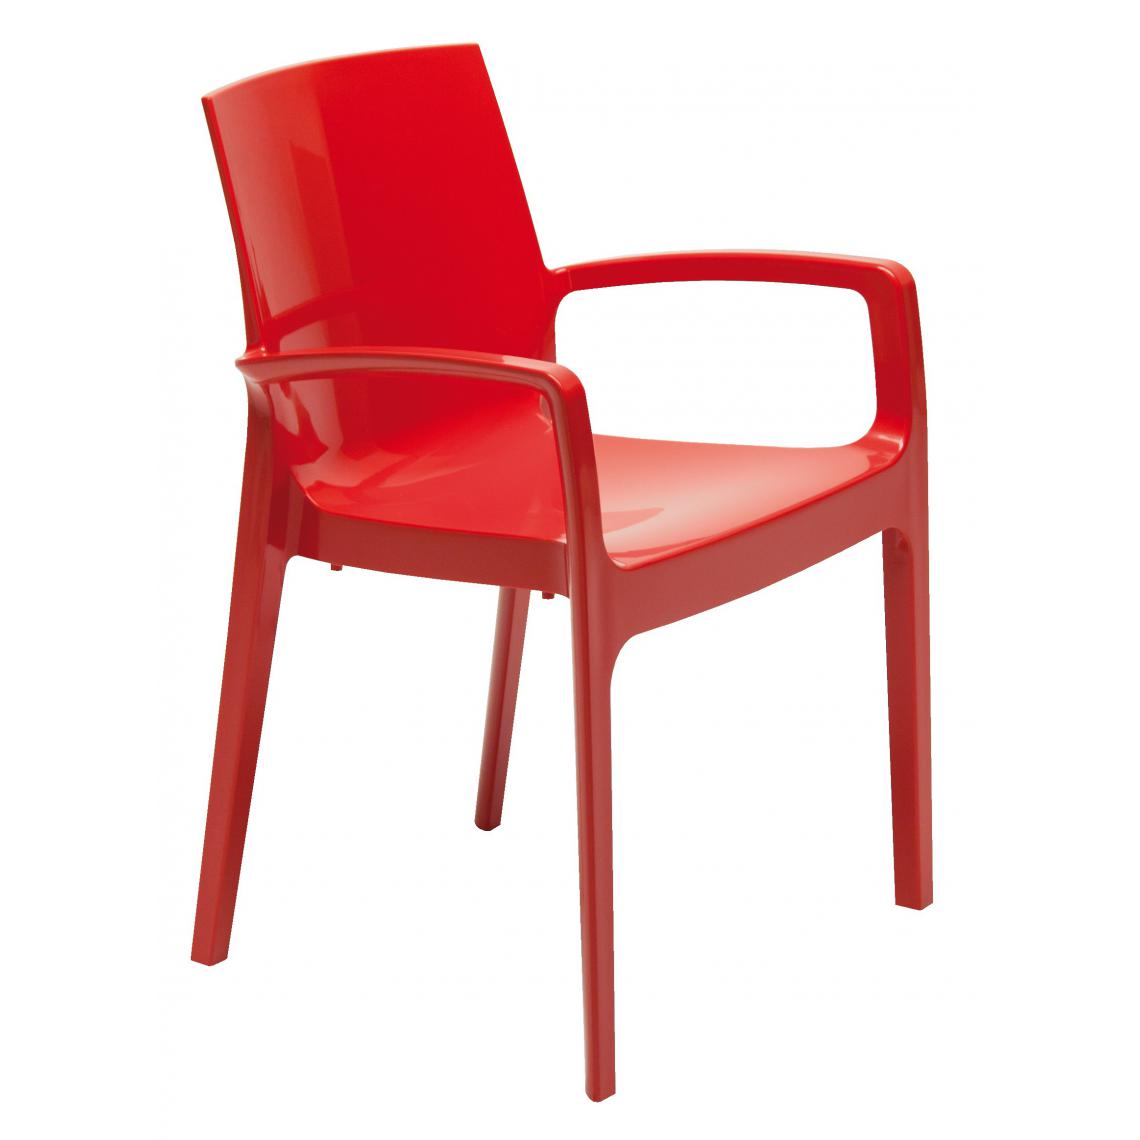 3S. x Home - Chaise Design Rouge GENES - Chaises